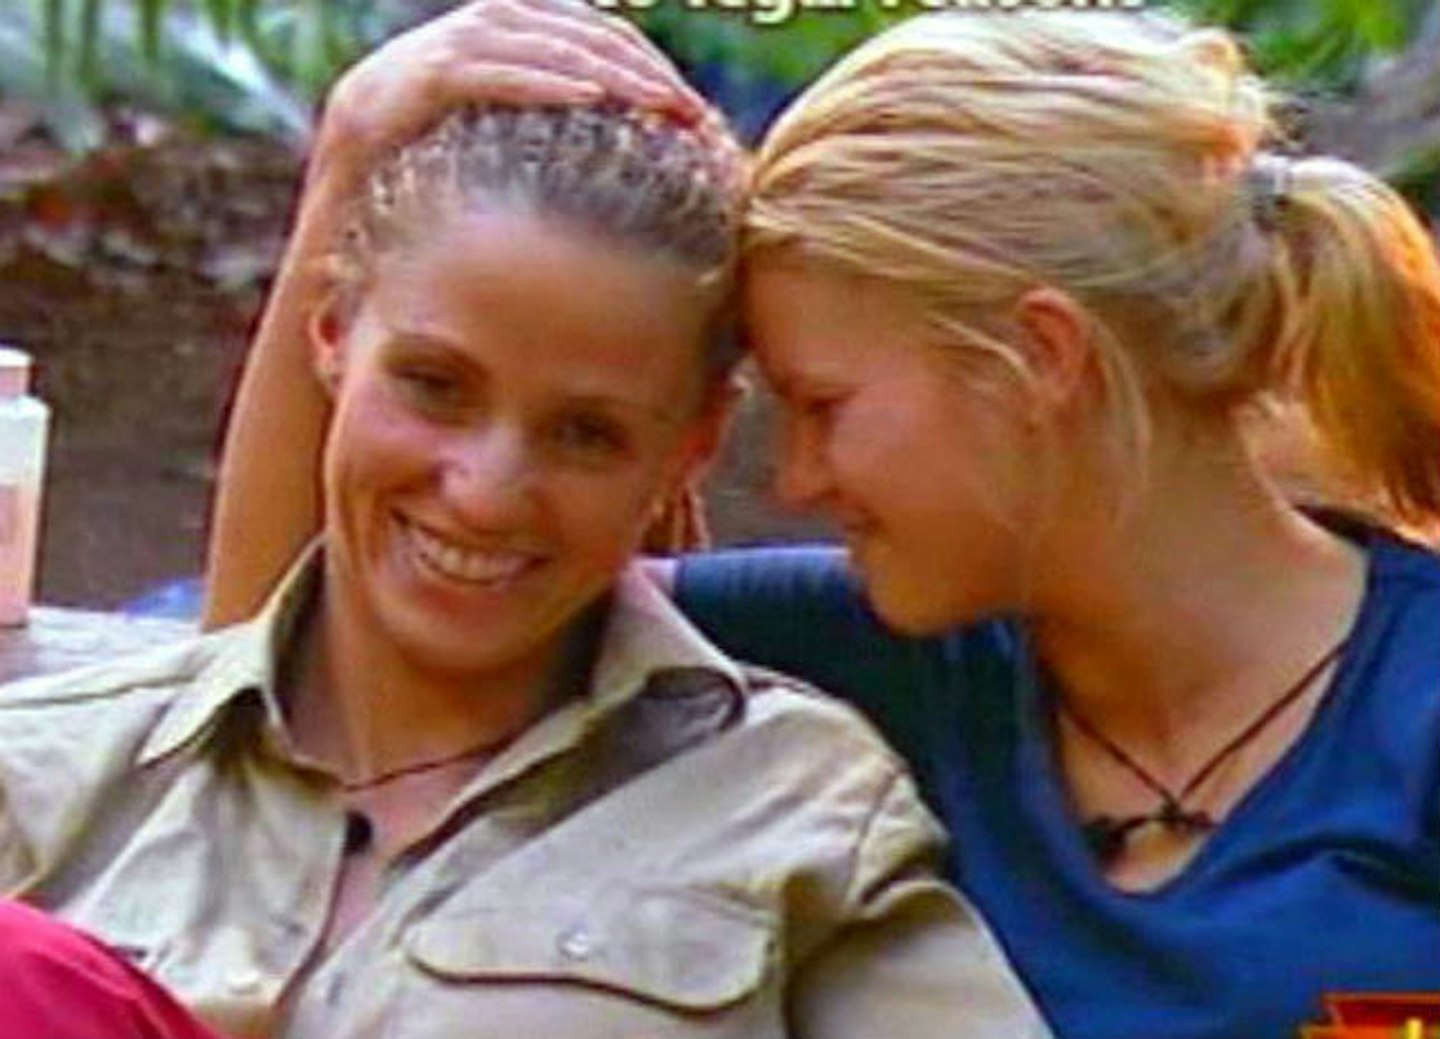 Kerry and Katie met on I'm a Celeb in 2004